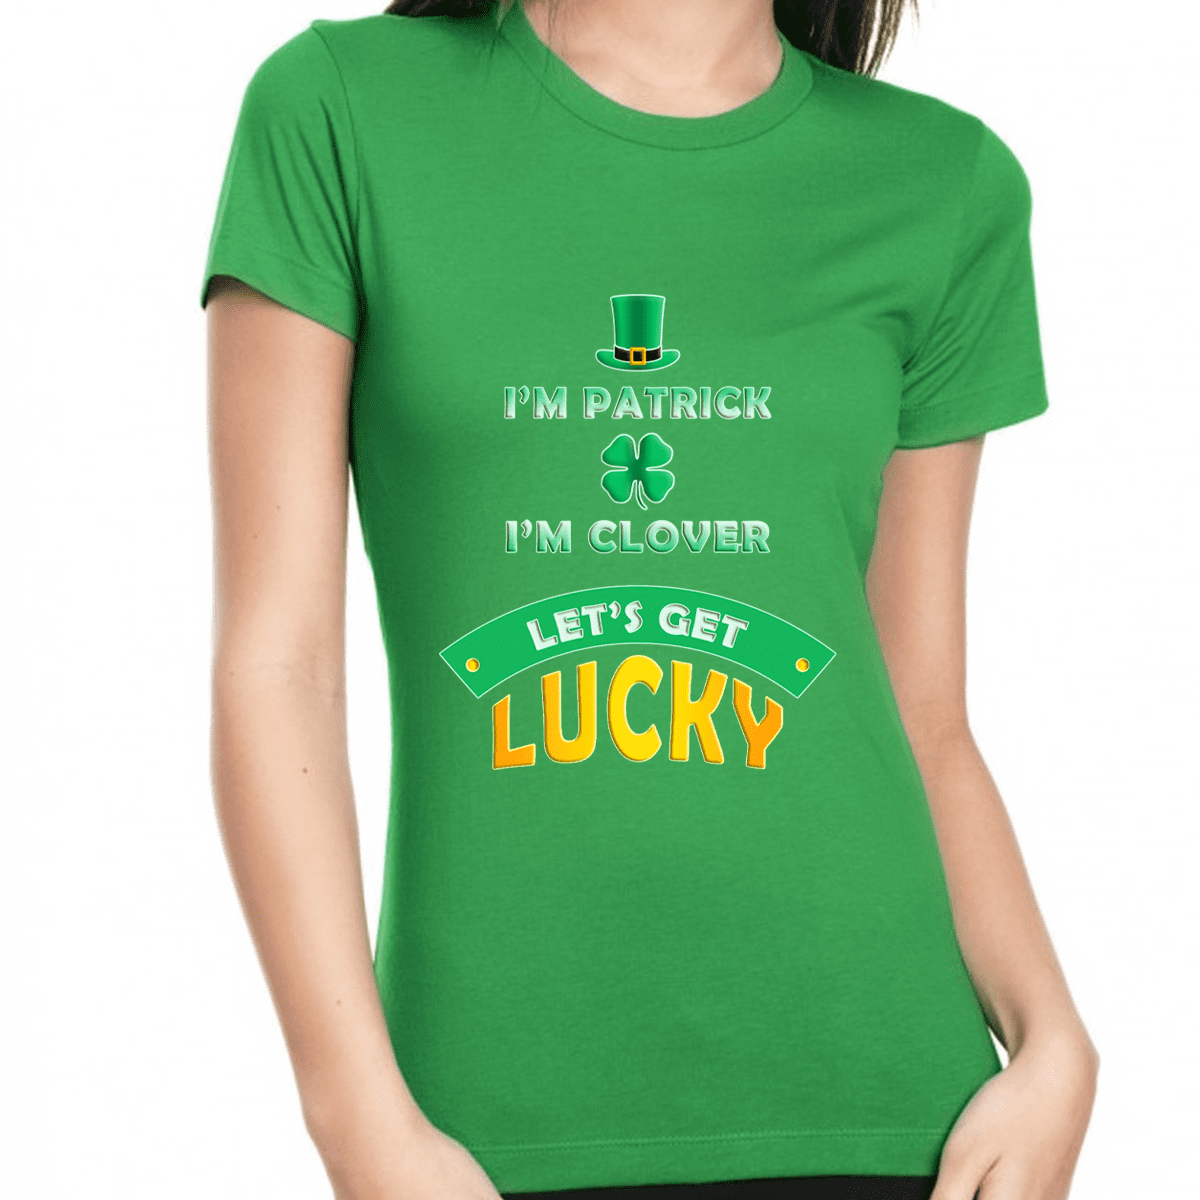 St Patrick/'s Day Drink Tee Lucky Shirt St Patrick/'s Day Shirt Irish Shirt Green Shamrock Shirt Drinking Shirt St Patty Day